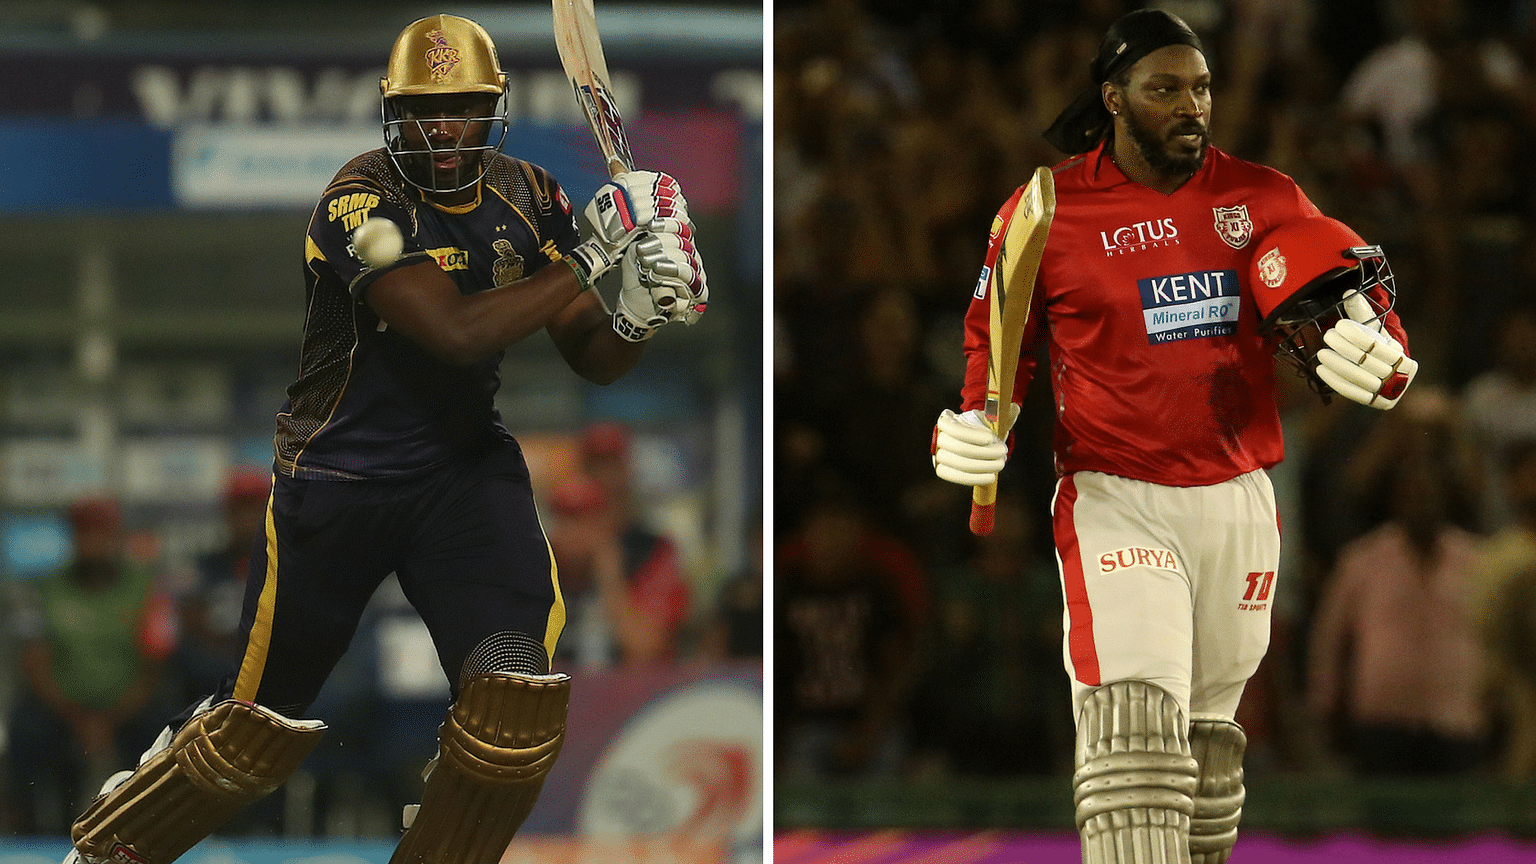 File pictures of Andre Russell (left) and Chris Gayle.